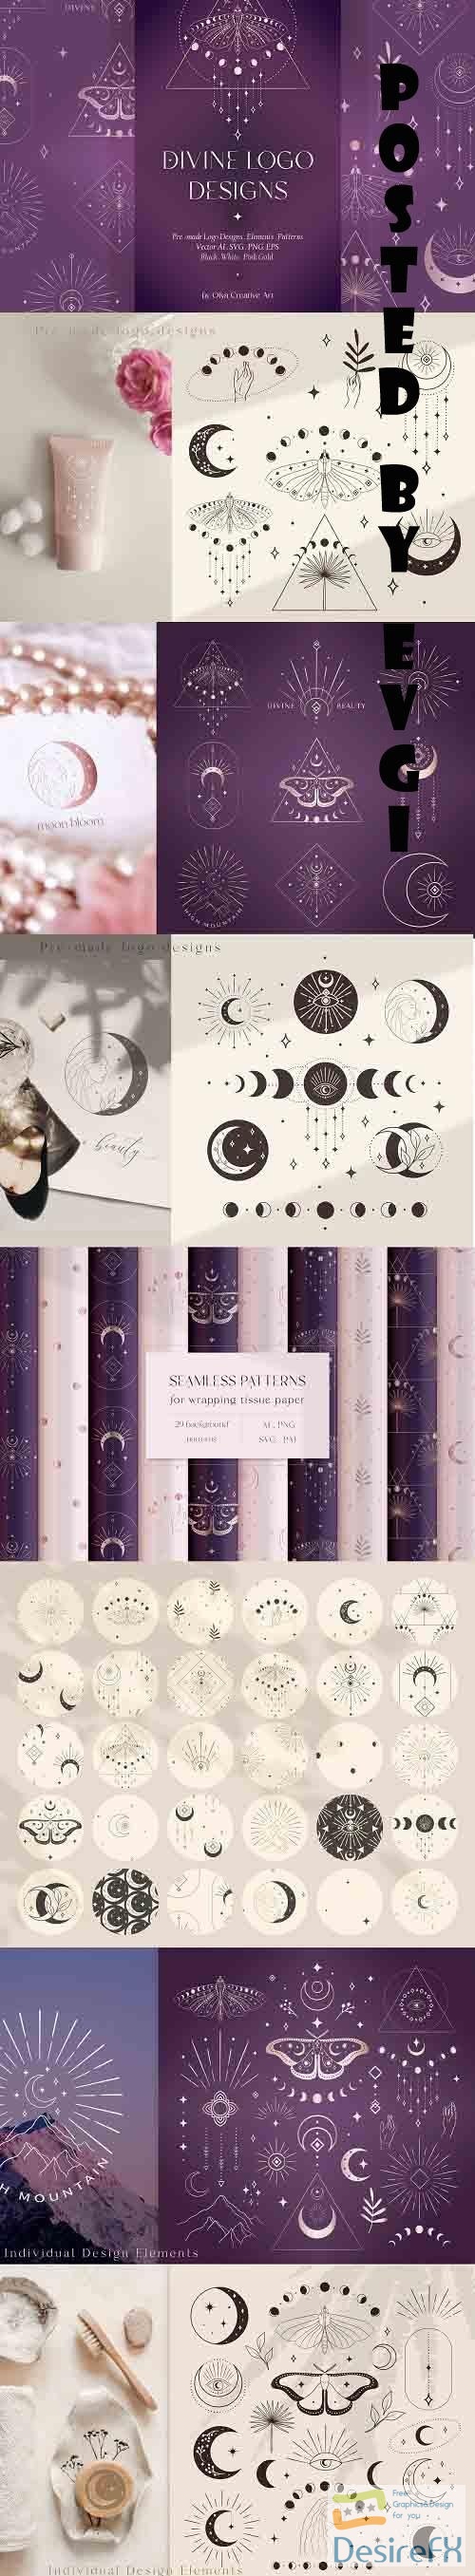 Divine Beauty Logo Designs, Elements and Patterns Collection - 6131969